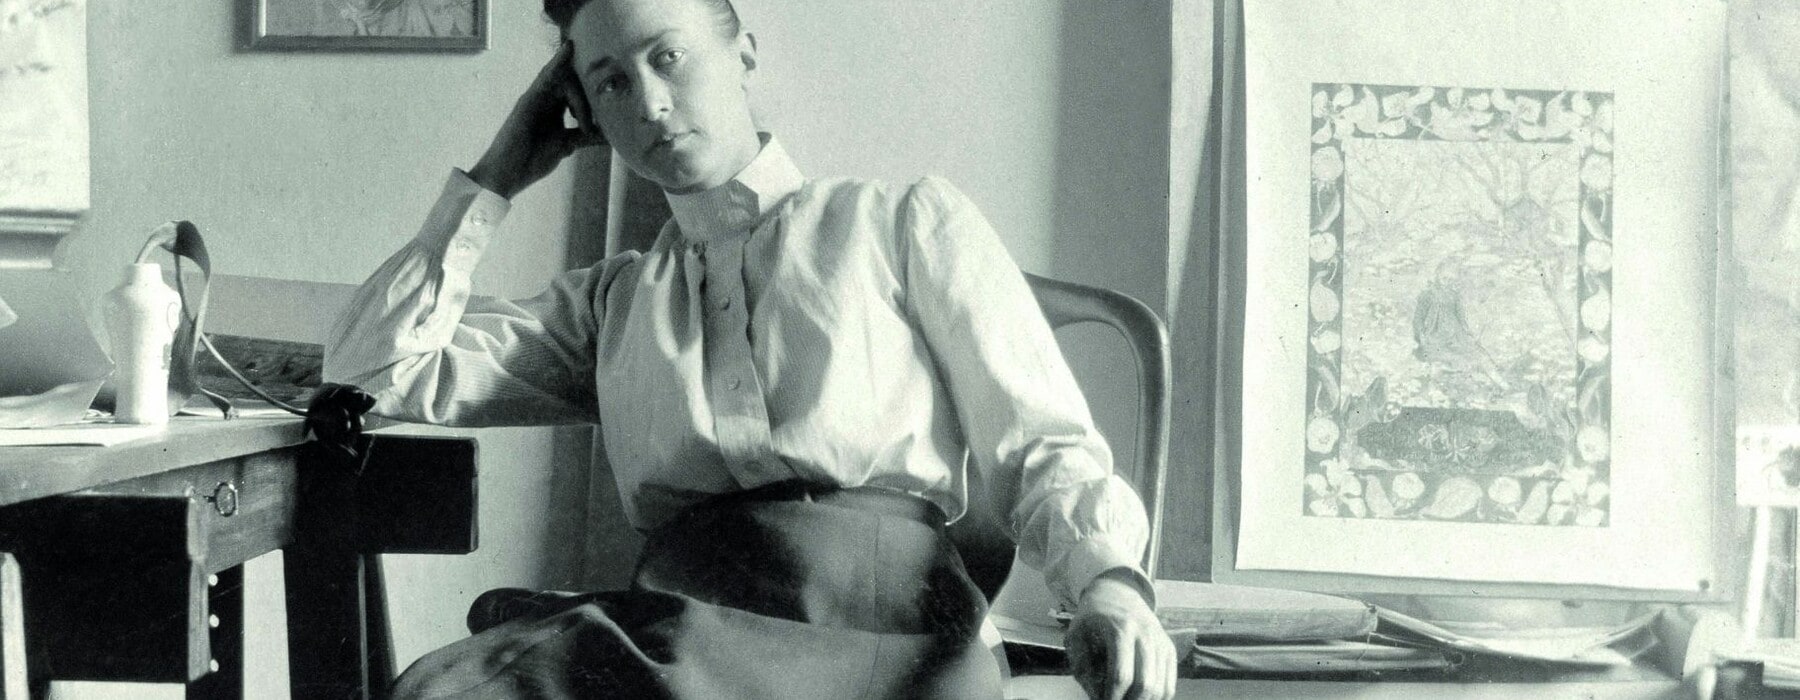 Black and white image of Hilma af Klint sitting in a chair in an art studio